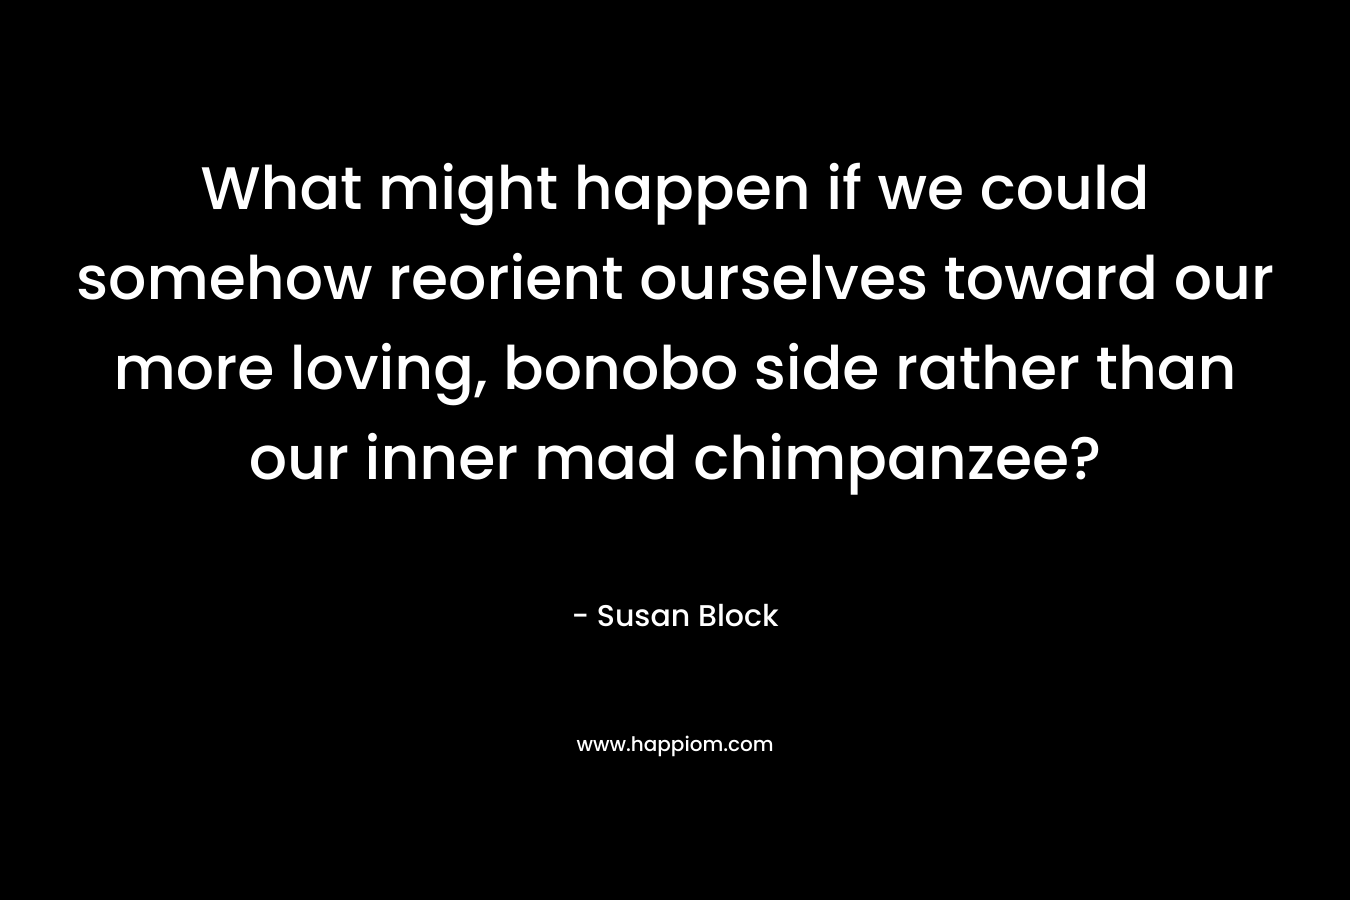 What might happen if we could somehow reorient ourselves toward our more loving, bonobo side rather than our inner mad chimpanzee?